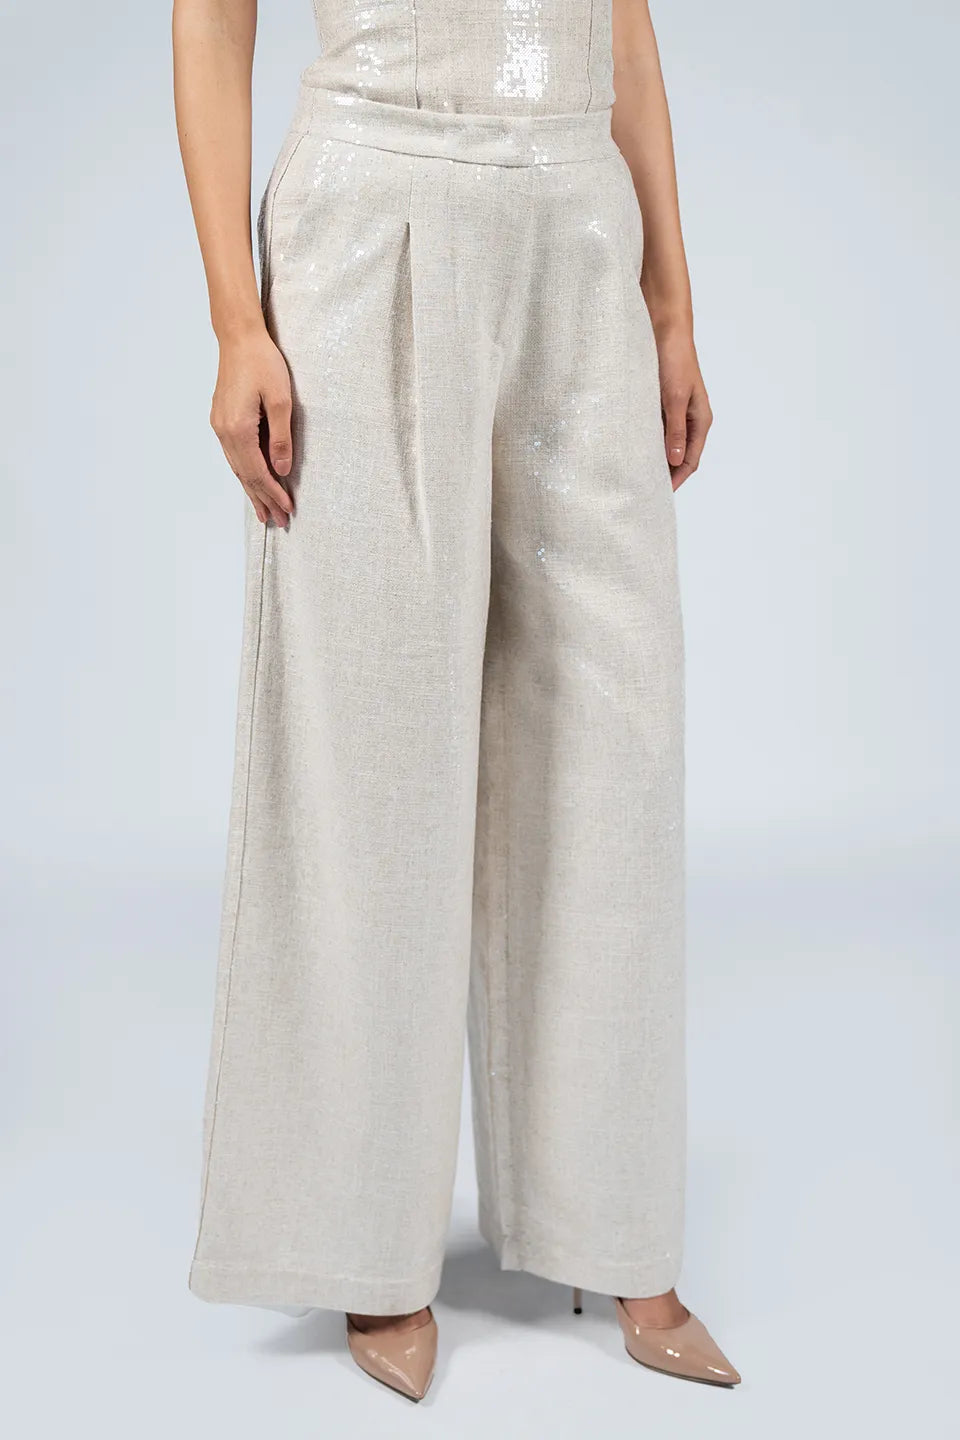 Designer Beige Women pants, shop online with free delivery in UAE. Product gallery 3